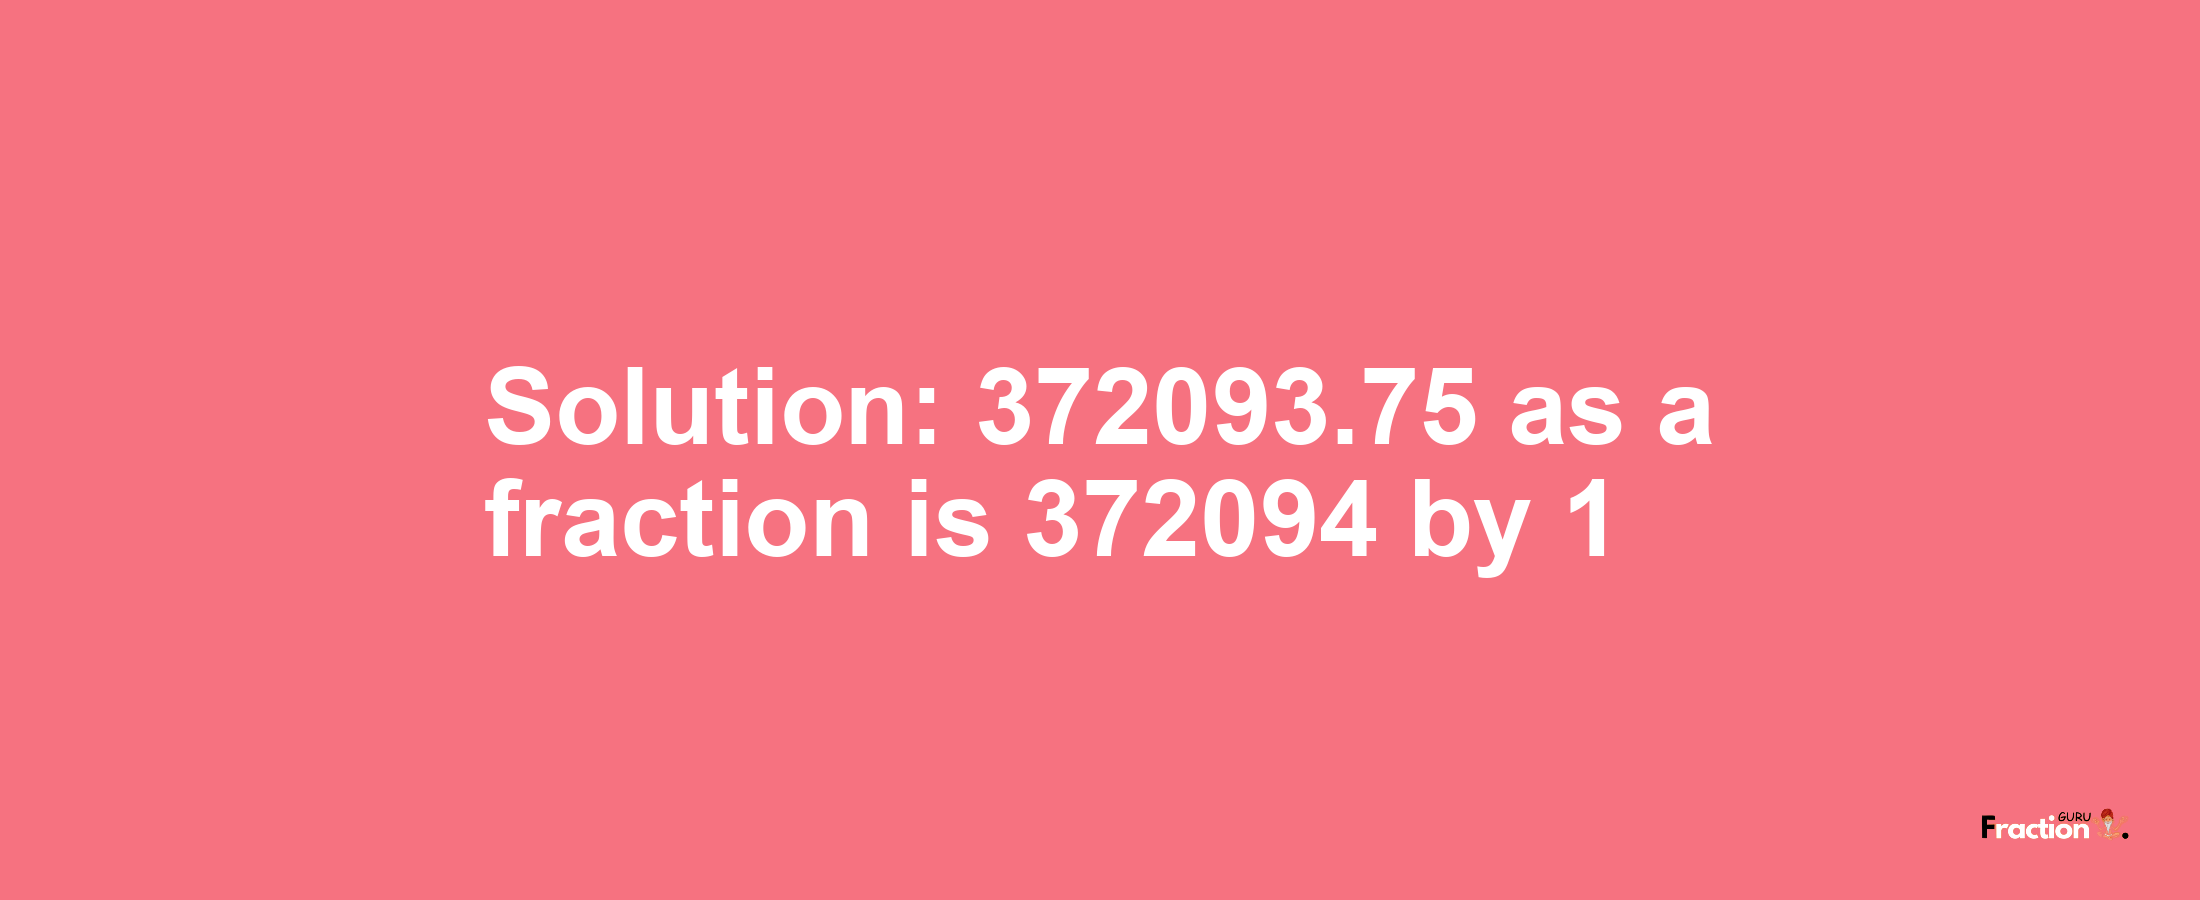 Solution:372093.75 as a fraction is 372094/1